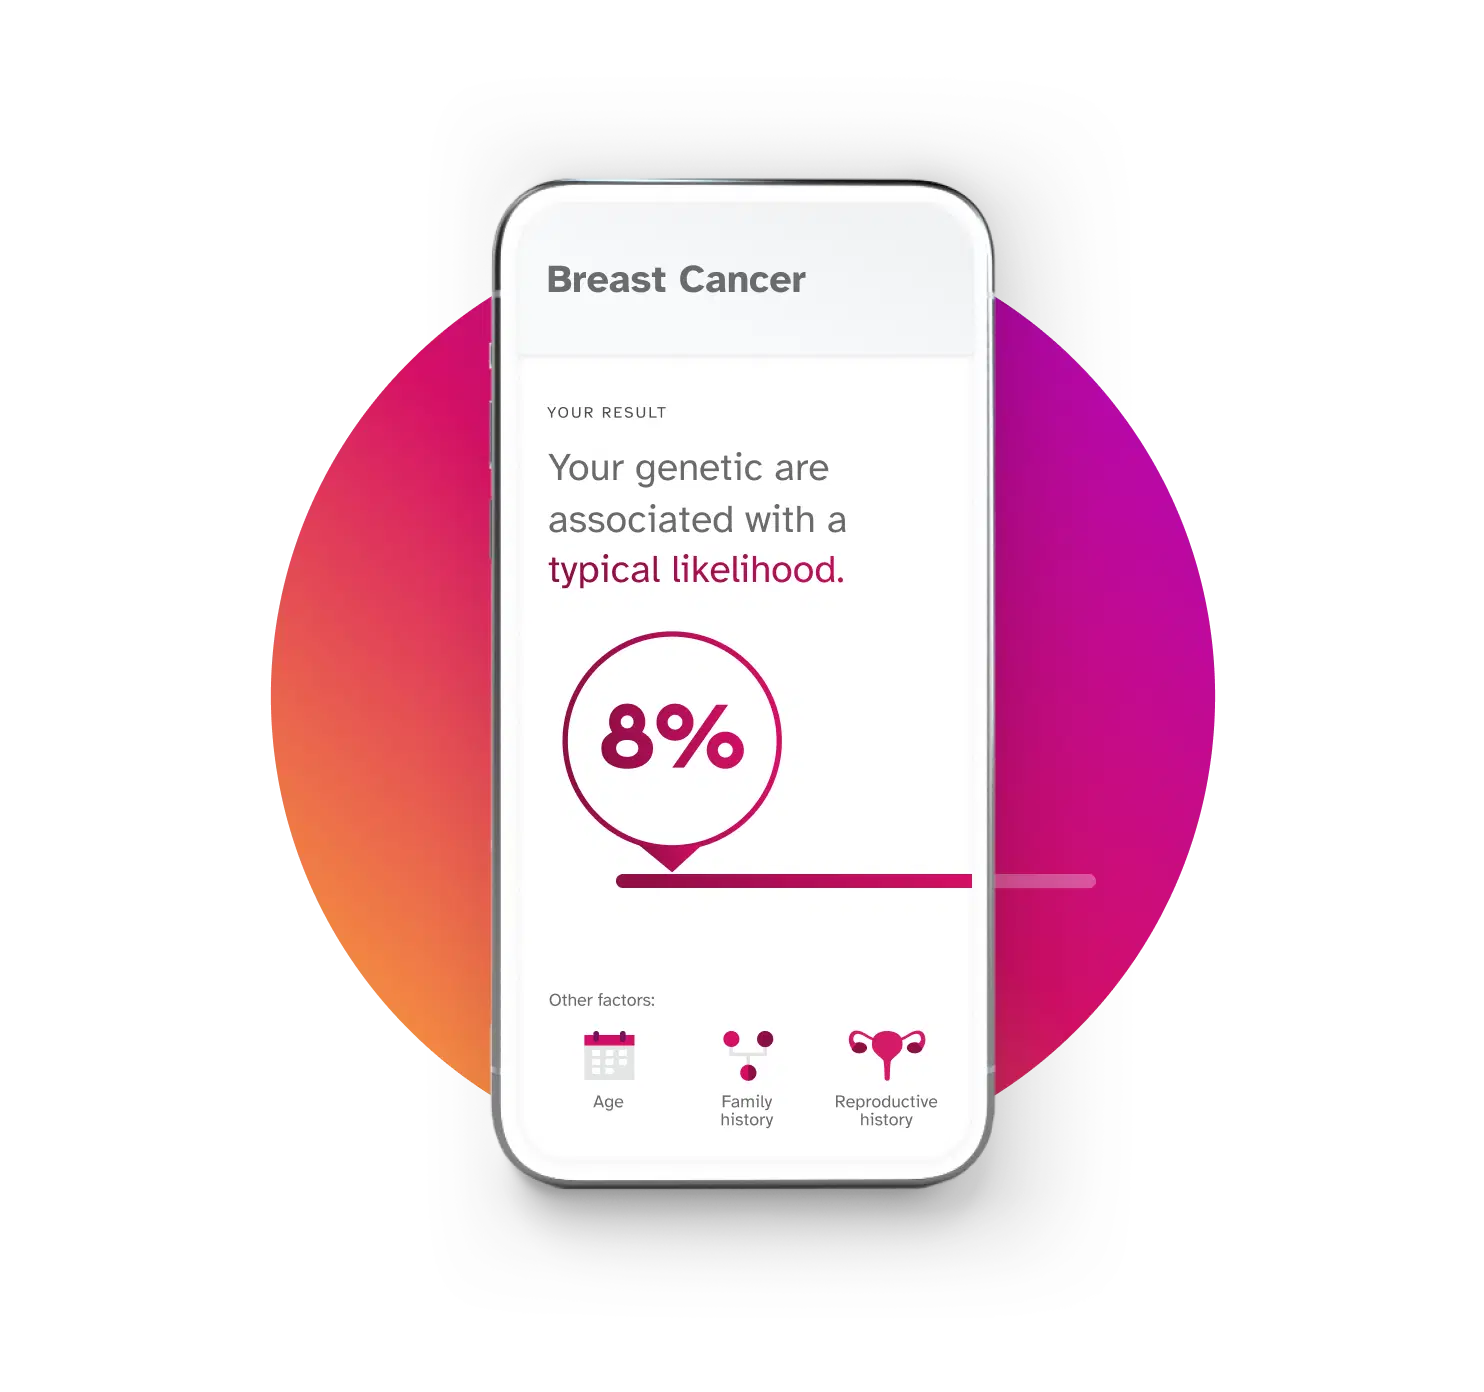 Phone screen showing Breast Cancer report. Example result is Your genetics are associated with a typical likelihood, showing a likelihood of 8%. Factors included in this report include age, family history, and reproductive history.